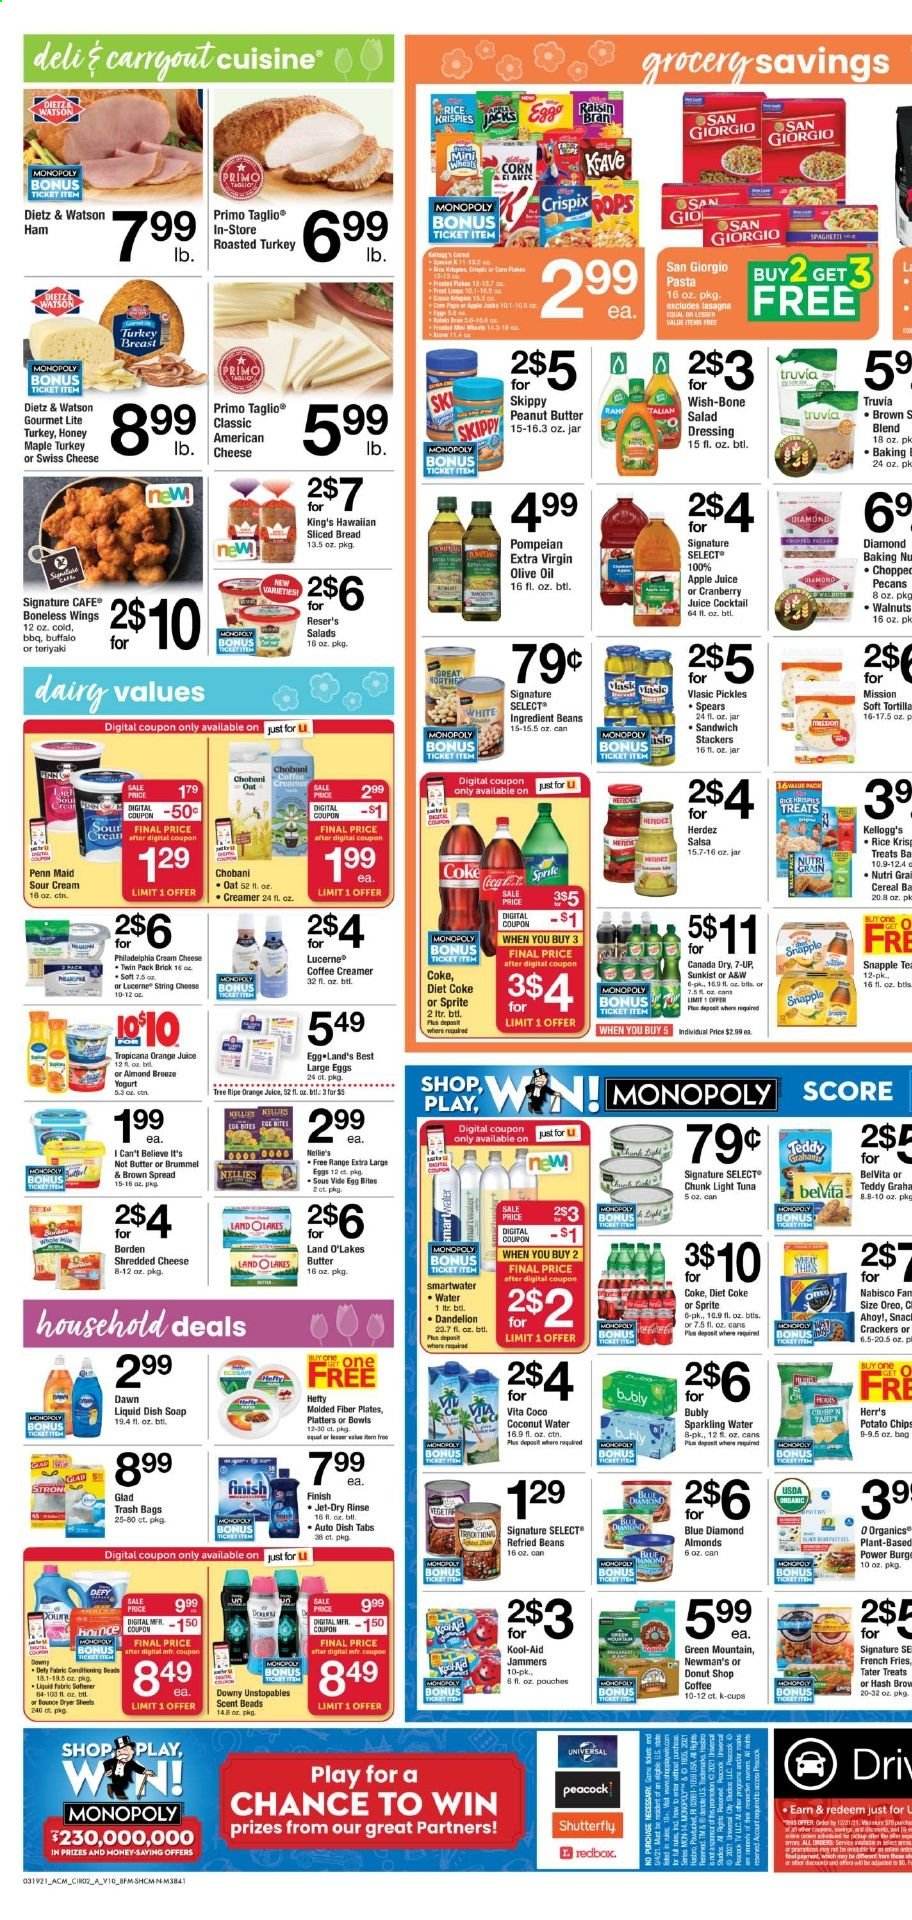 thumbnail - ACME Flyer - 03/19/2021 - 03/25/2021 - Sales products - bread, tortillas, tuna, cream cheese, sandwich, lasagna meal, ham, Dietz & Watson, american cheese, shredded cheese, swiss cheese, Philadelphia, Oreo, yoghurt, Chobani, large eggs, I Can't Believe It's Not Butter, sour cream, creamer, coffee and tea creamer, salsa, beans, corn, pickles, potato fries, french fries, crackers, Kellogg's, potato chips, chips, oats, refried beans, light tuna, cereals, Rice Krispies, Raisin Bran, belVita, pasta, salad dressing, dressing, teriyaki sauce, extra virgin olive oil, olive oil, honey, peanut butter, almonds, walnuts, pecans, Blue Diamond, apple juice, Canada Dry, Coca-Cola, cranberry juice, Sprite, orange juice, juice, Diet Coke, 7UP, Snapple, A&W, sparkling water, tea, coffee capsules, K-Cups, Green Mountain, turkey breast, Unstopables, Bounce, dryer sheets, Jet, soap, Hefty, trash bags, plate, bag, Monopoly, teddy. Page 2.